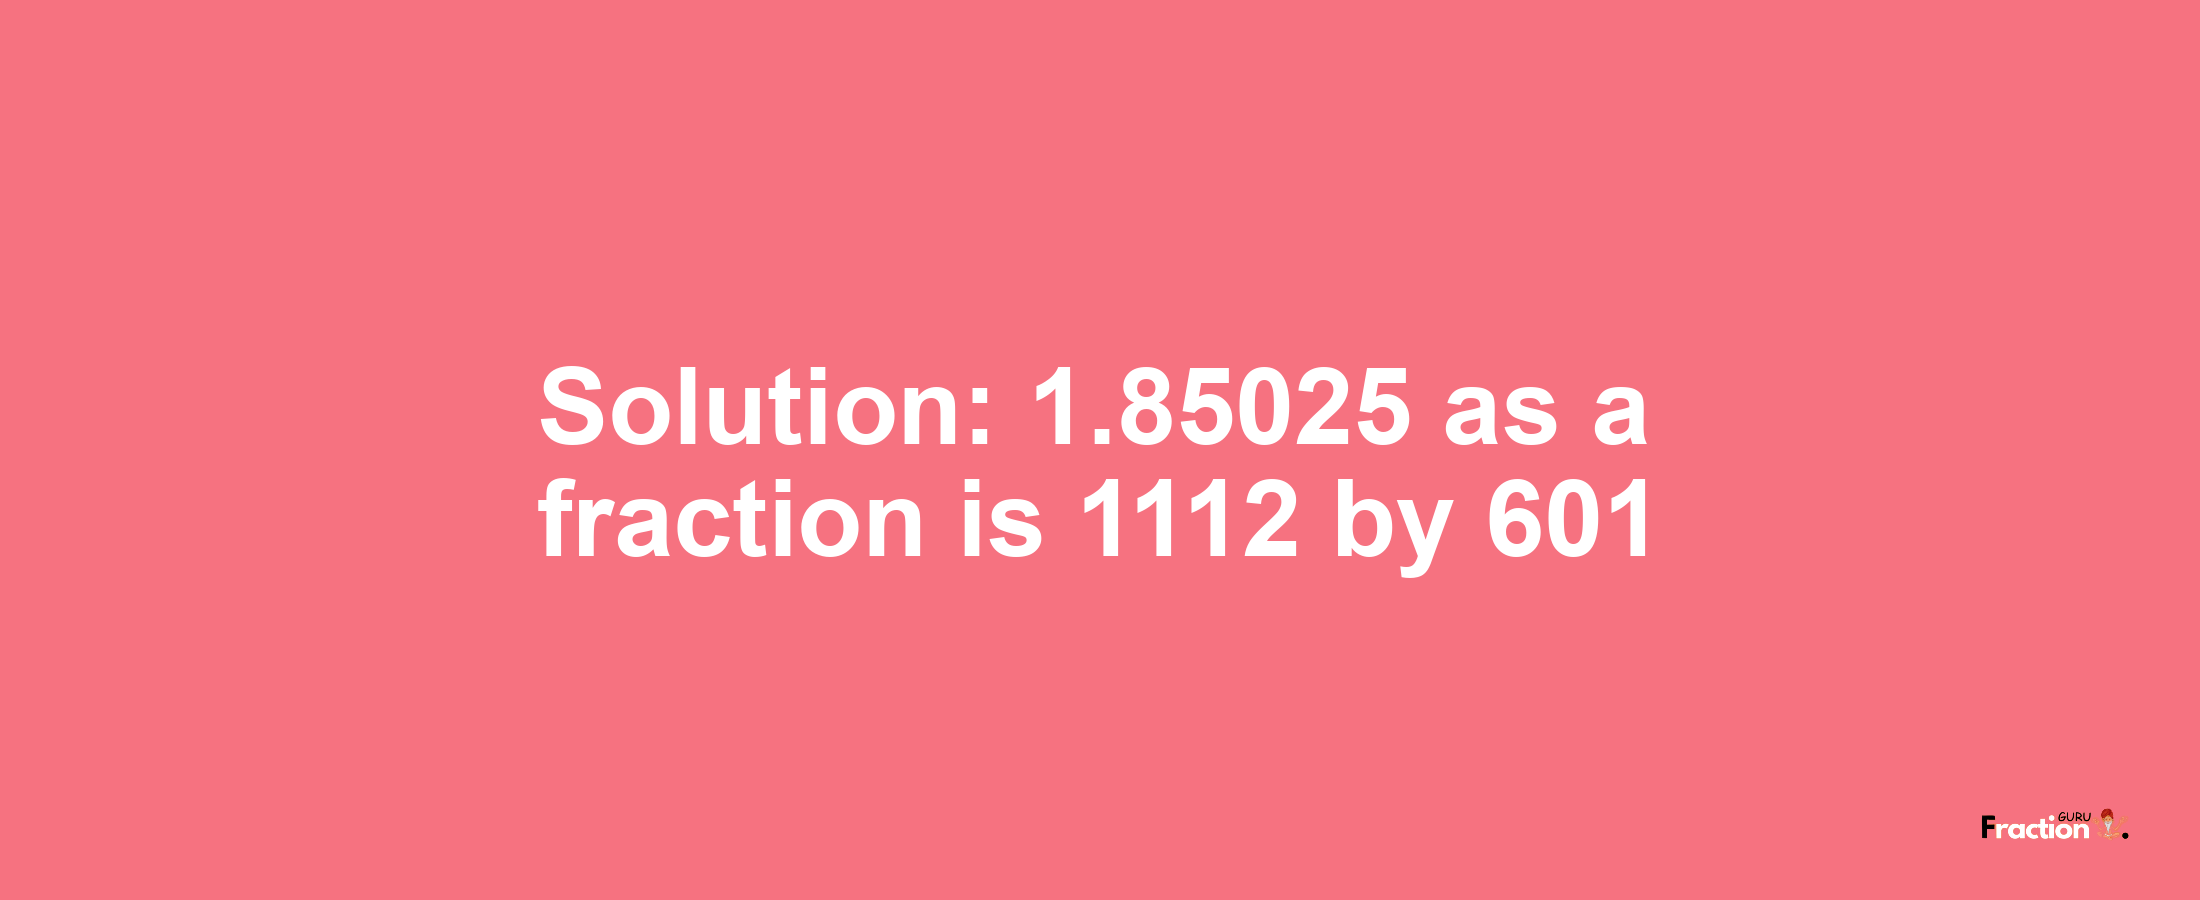 Solution:1.85025 as a fraction is 1112/601